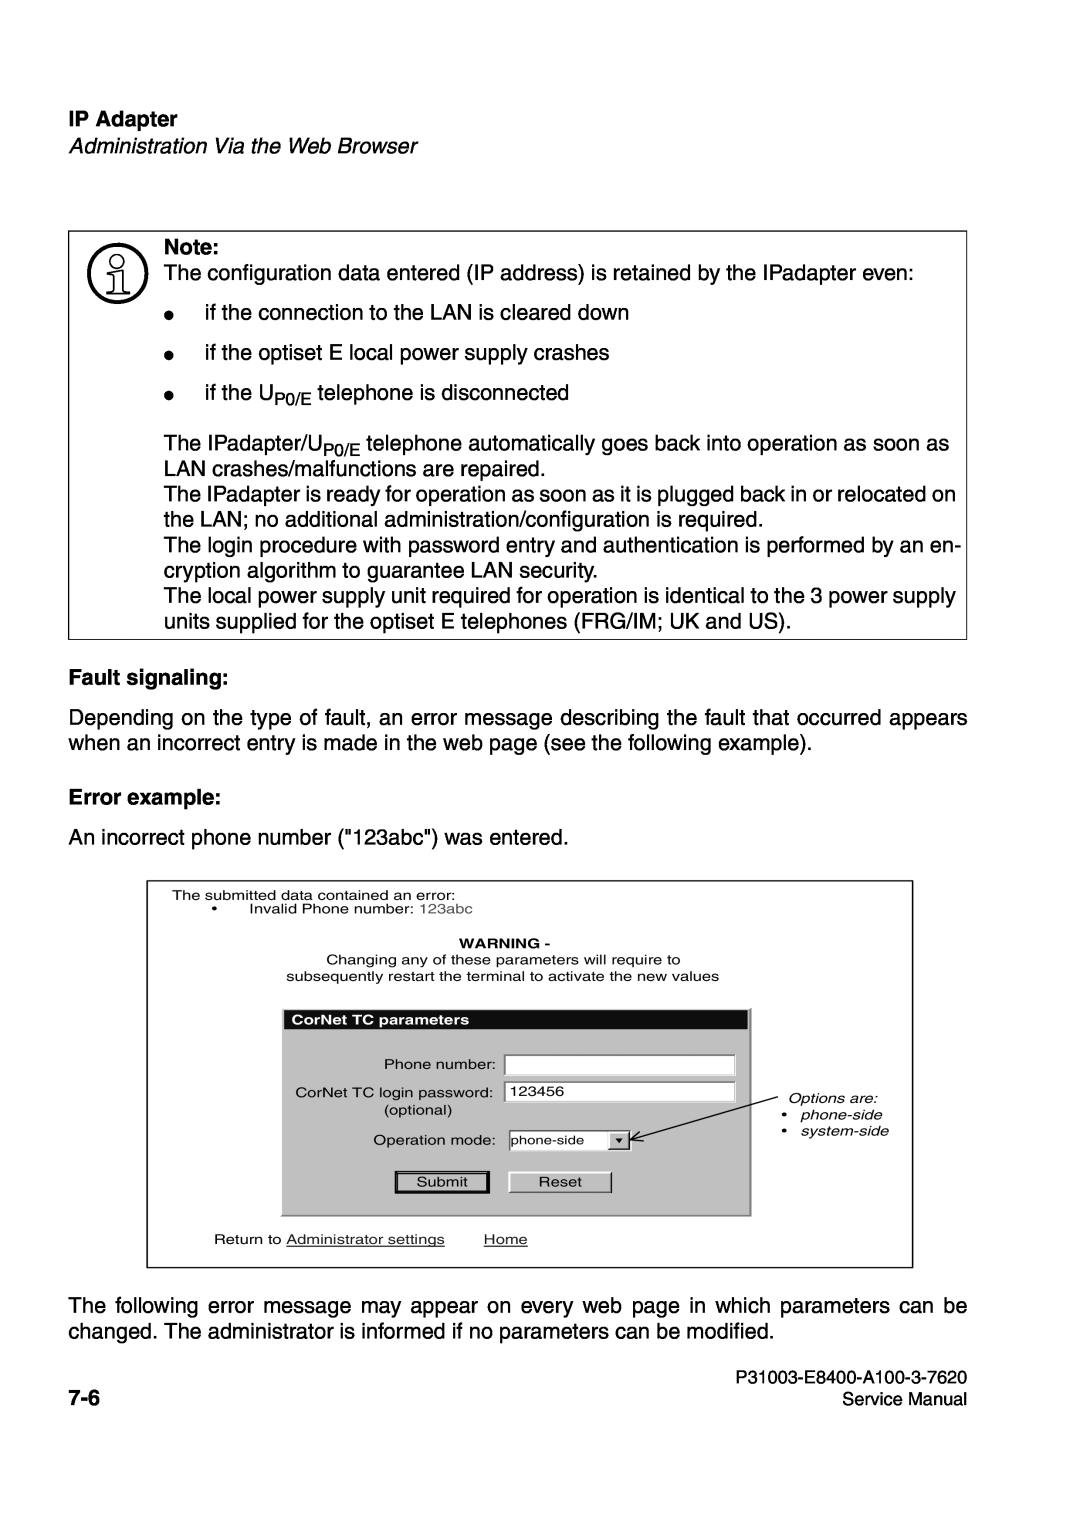 Siemens 500 service manual IP Adapter, if the connection to the LAN is cleared down, Fault signaling, Error example 